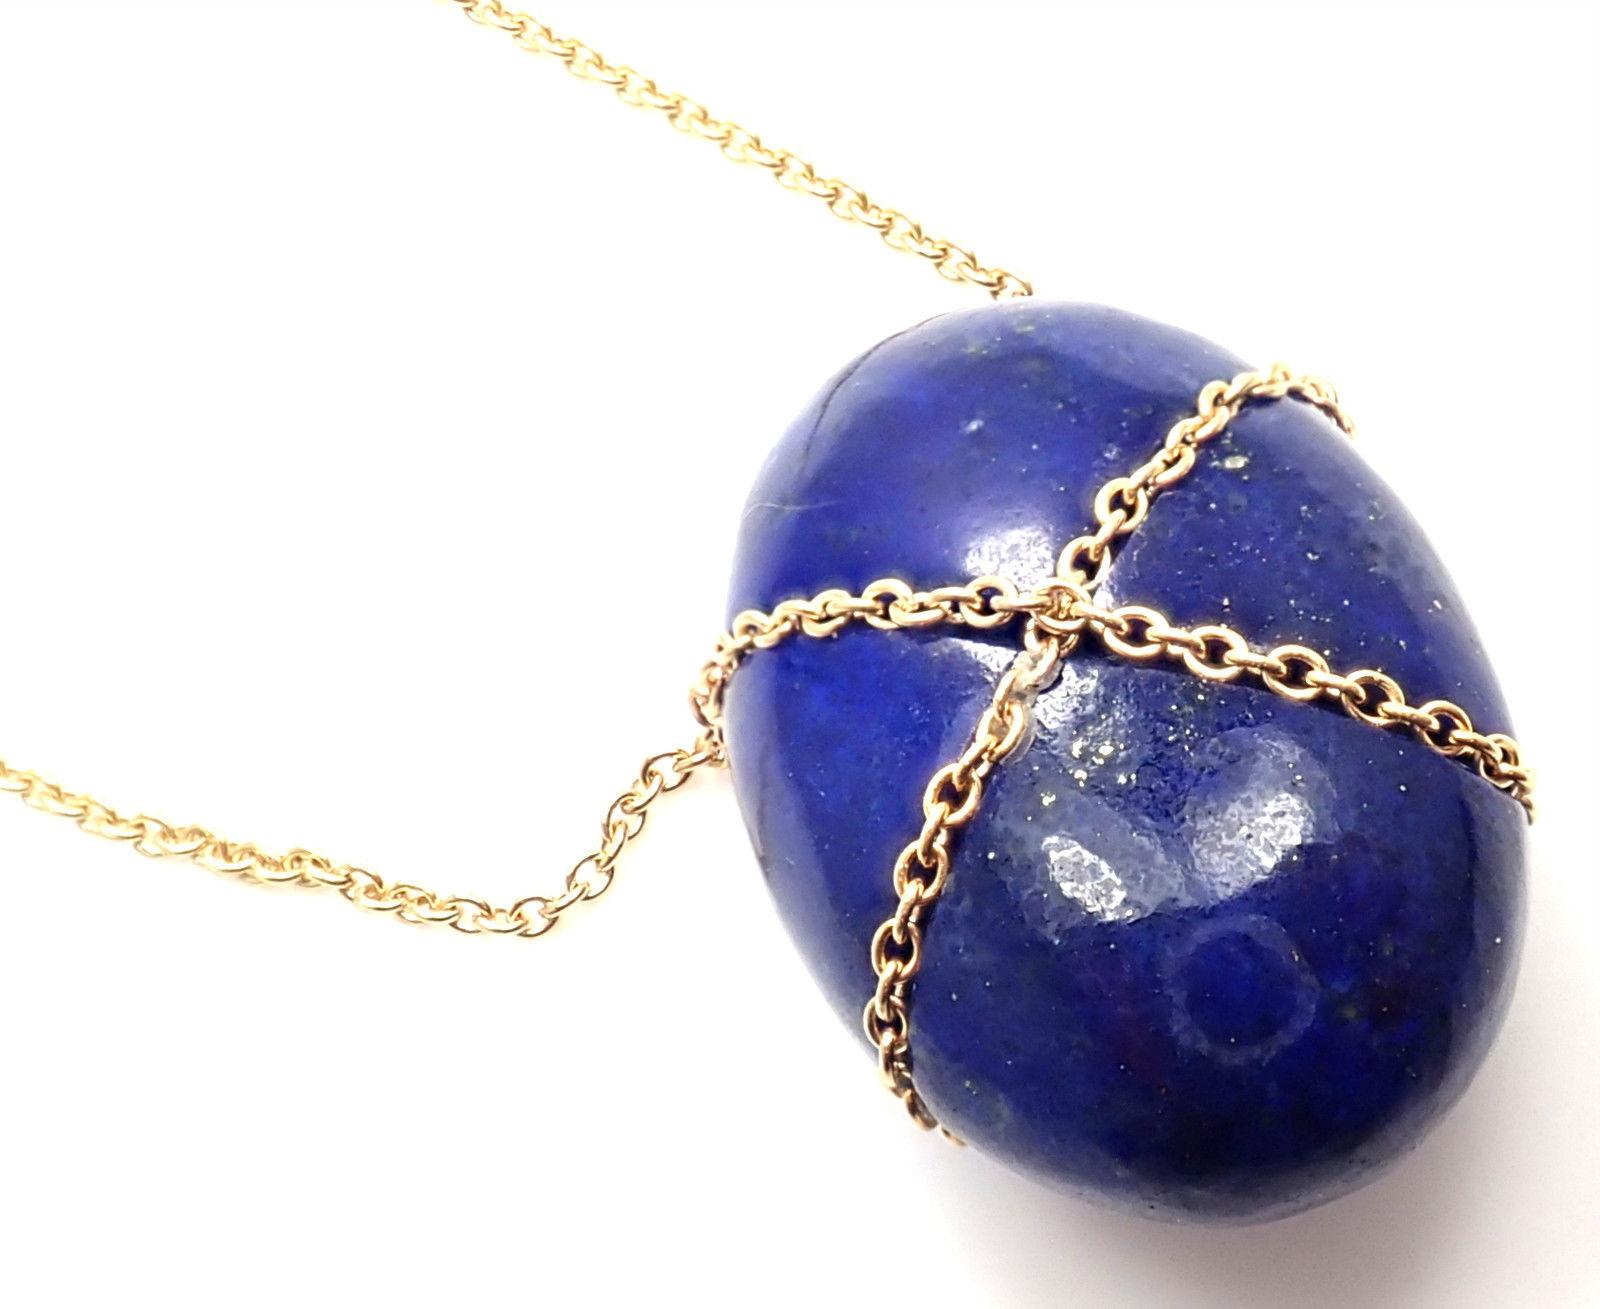 18k Yellow Gold Large Lapis Lazuli Crossover Pendant Necklace by Tiffany & Co. 
With 1 Lapis 22mm x 15mm x 11mm
This necklace is in mint condition and comes with Tiffany & Co blue box.
Details: 
Chain Length: 15